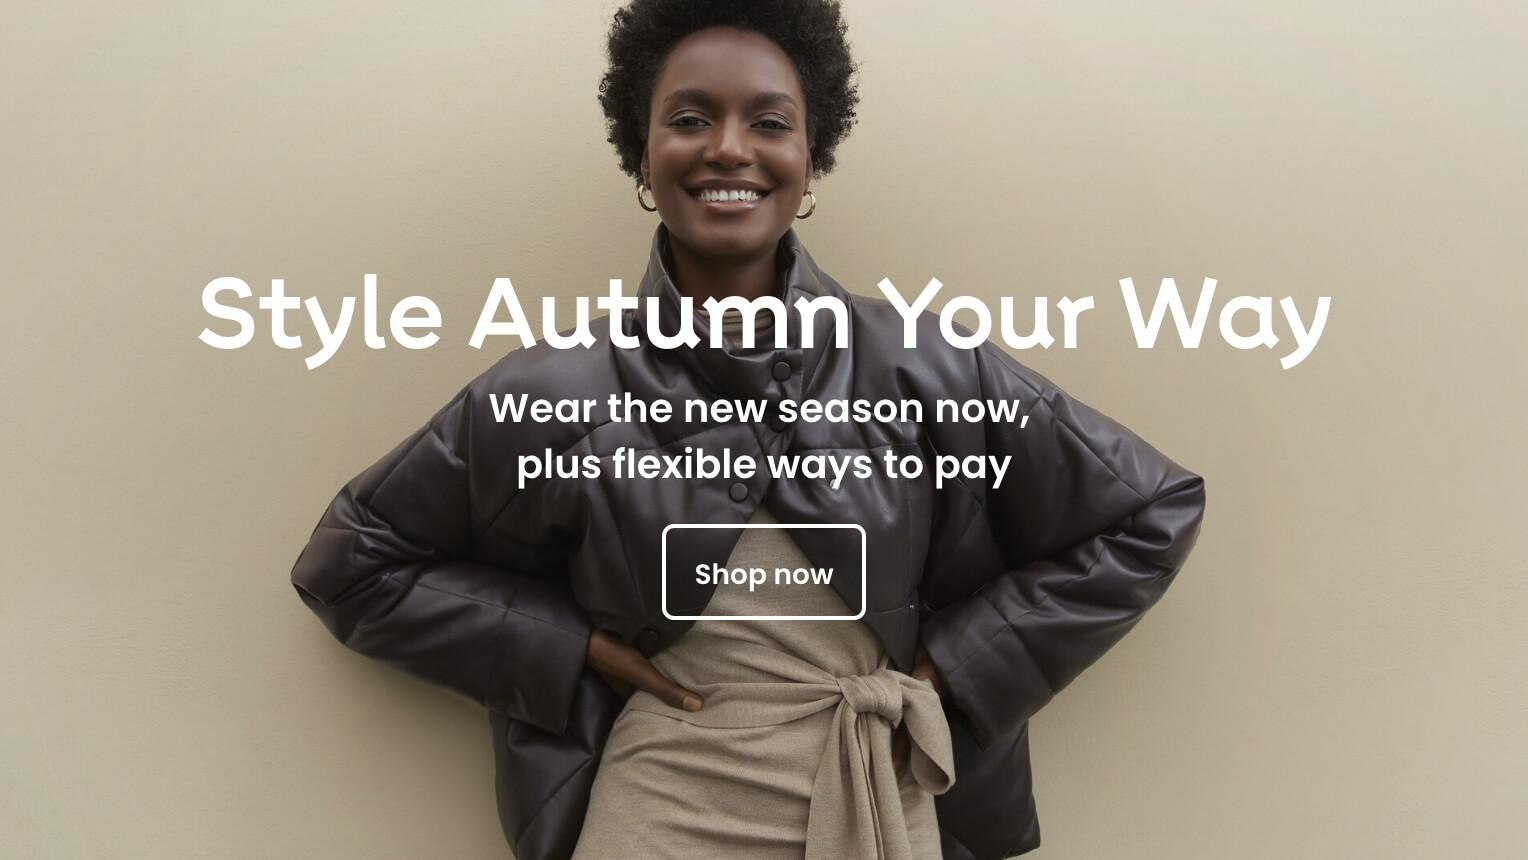 Style Autumn Your Way